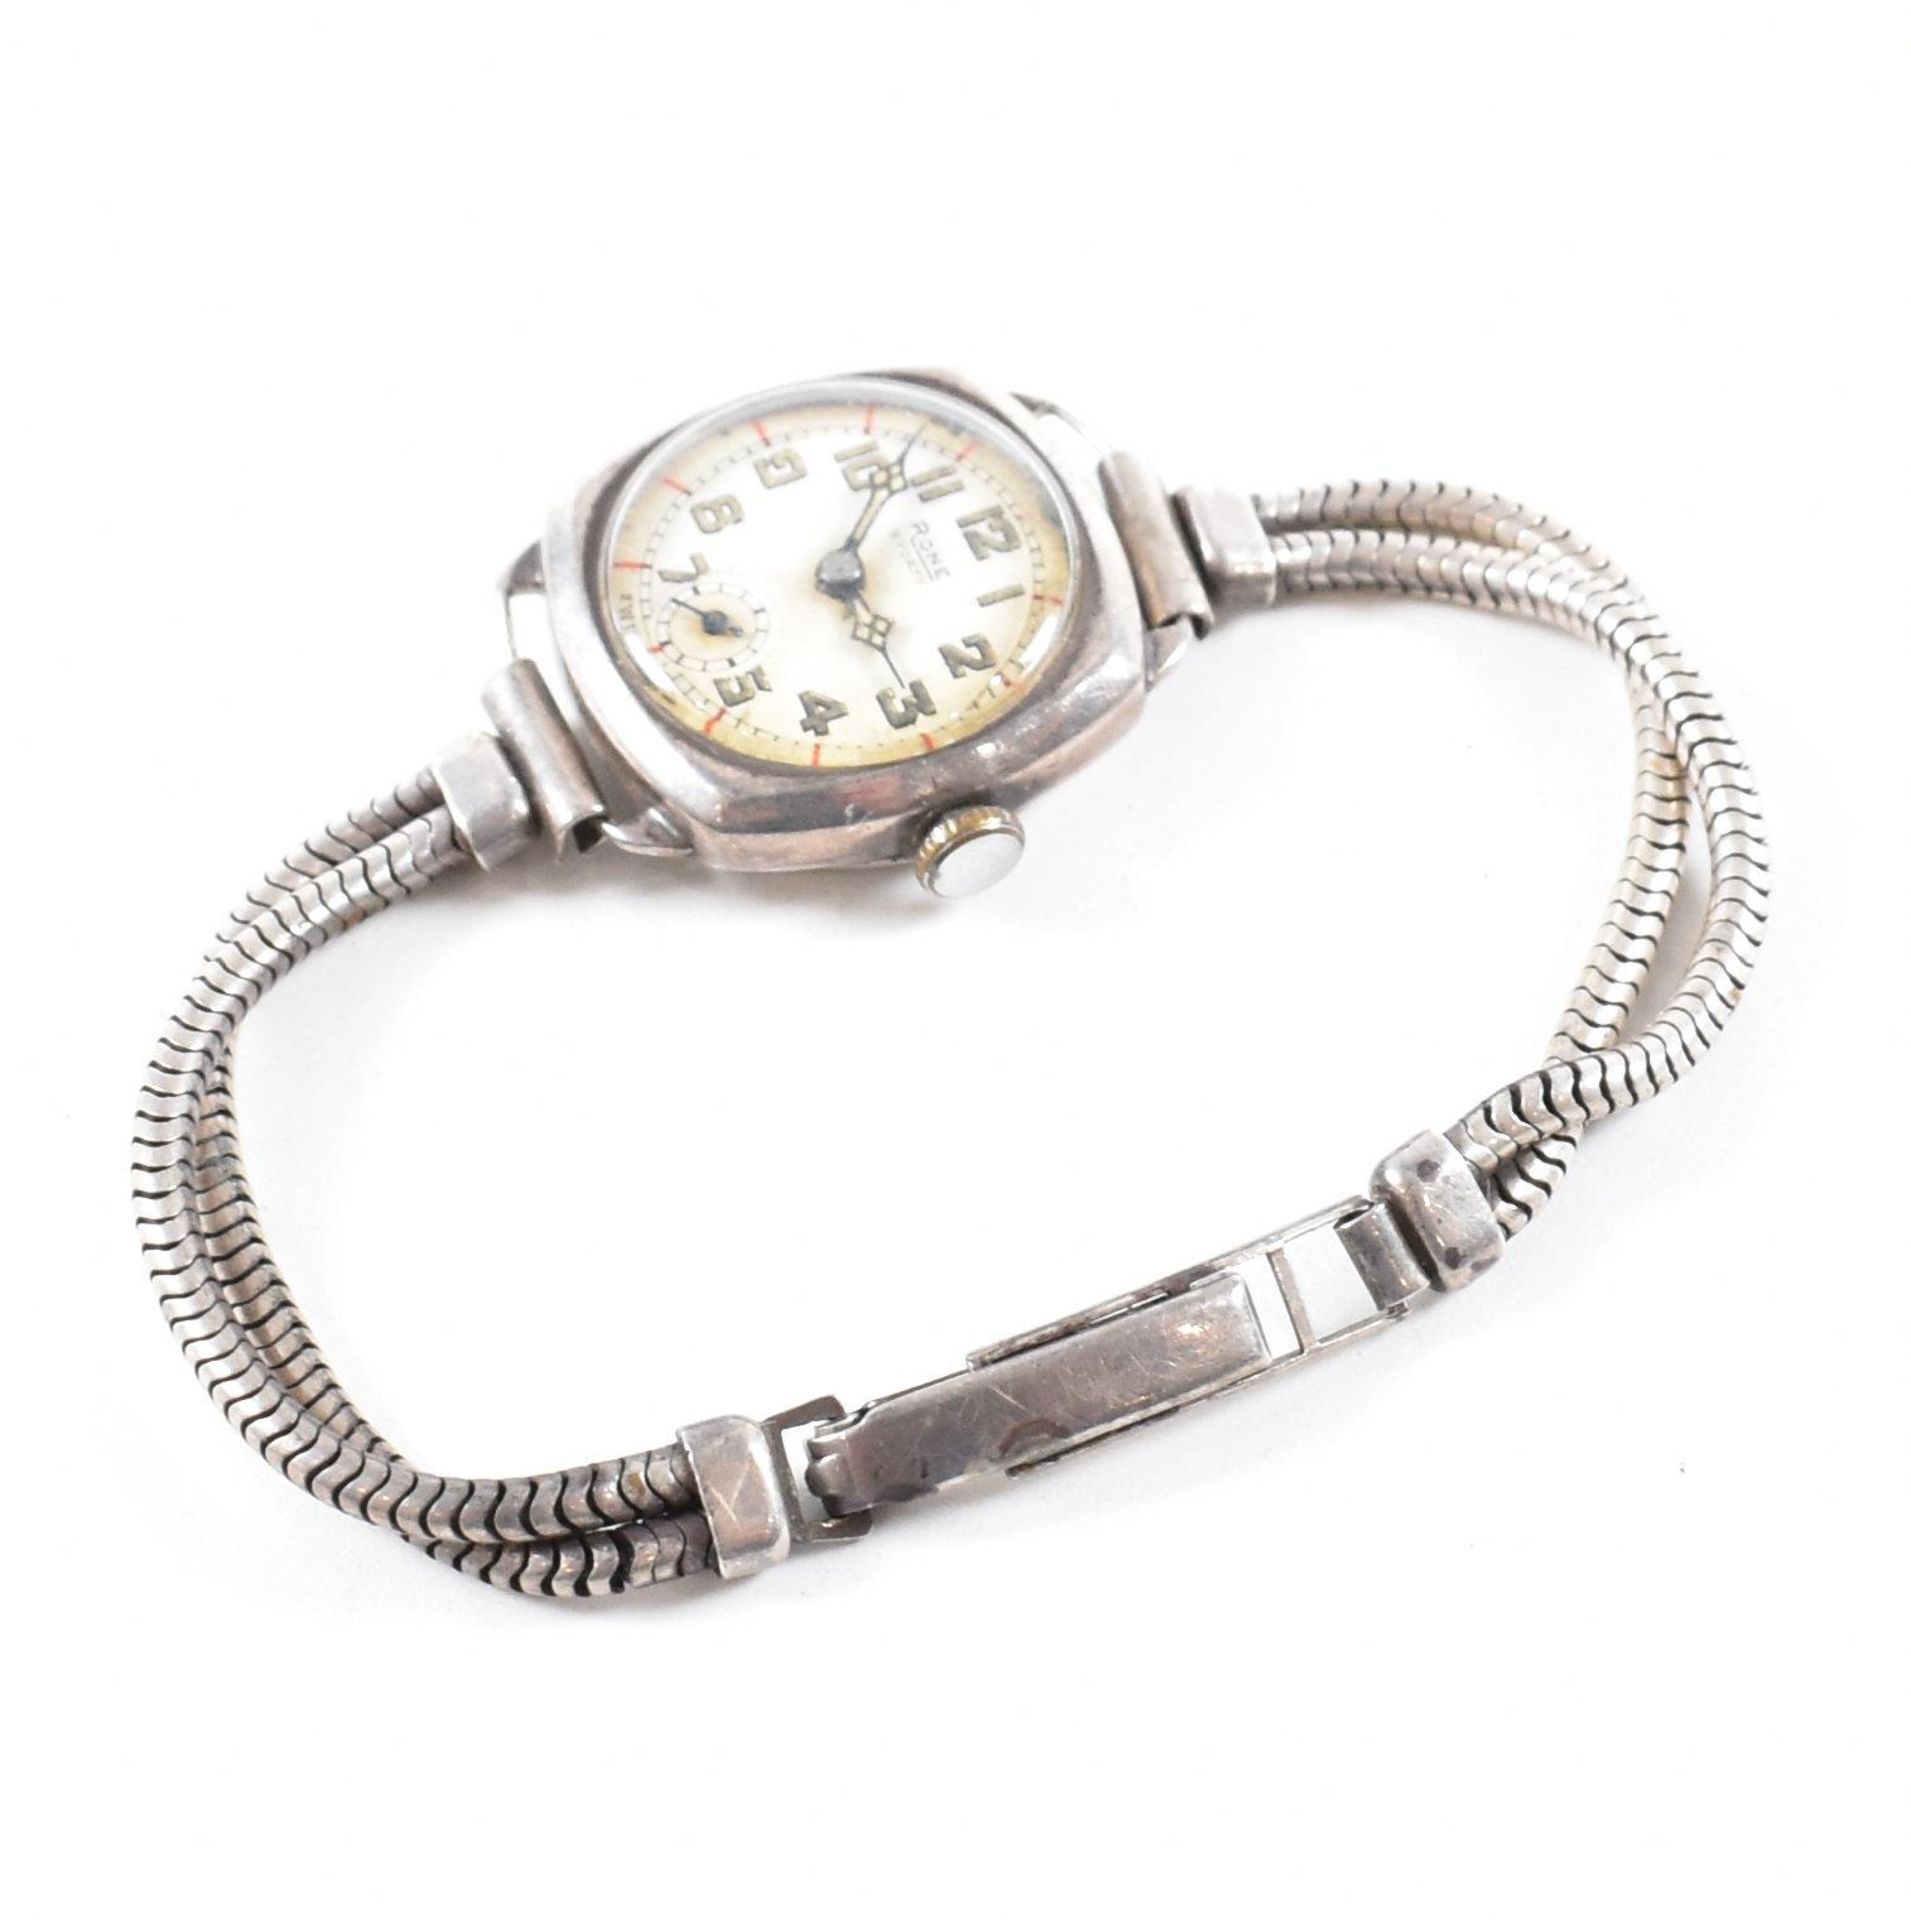 RONE SPORTS WATCH ON HALLMARKED SILVER STRAP - Image 5 of 5